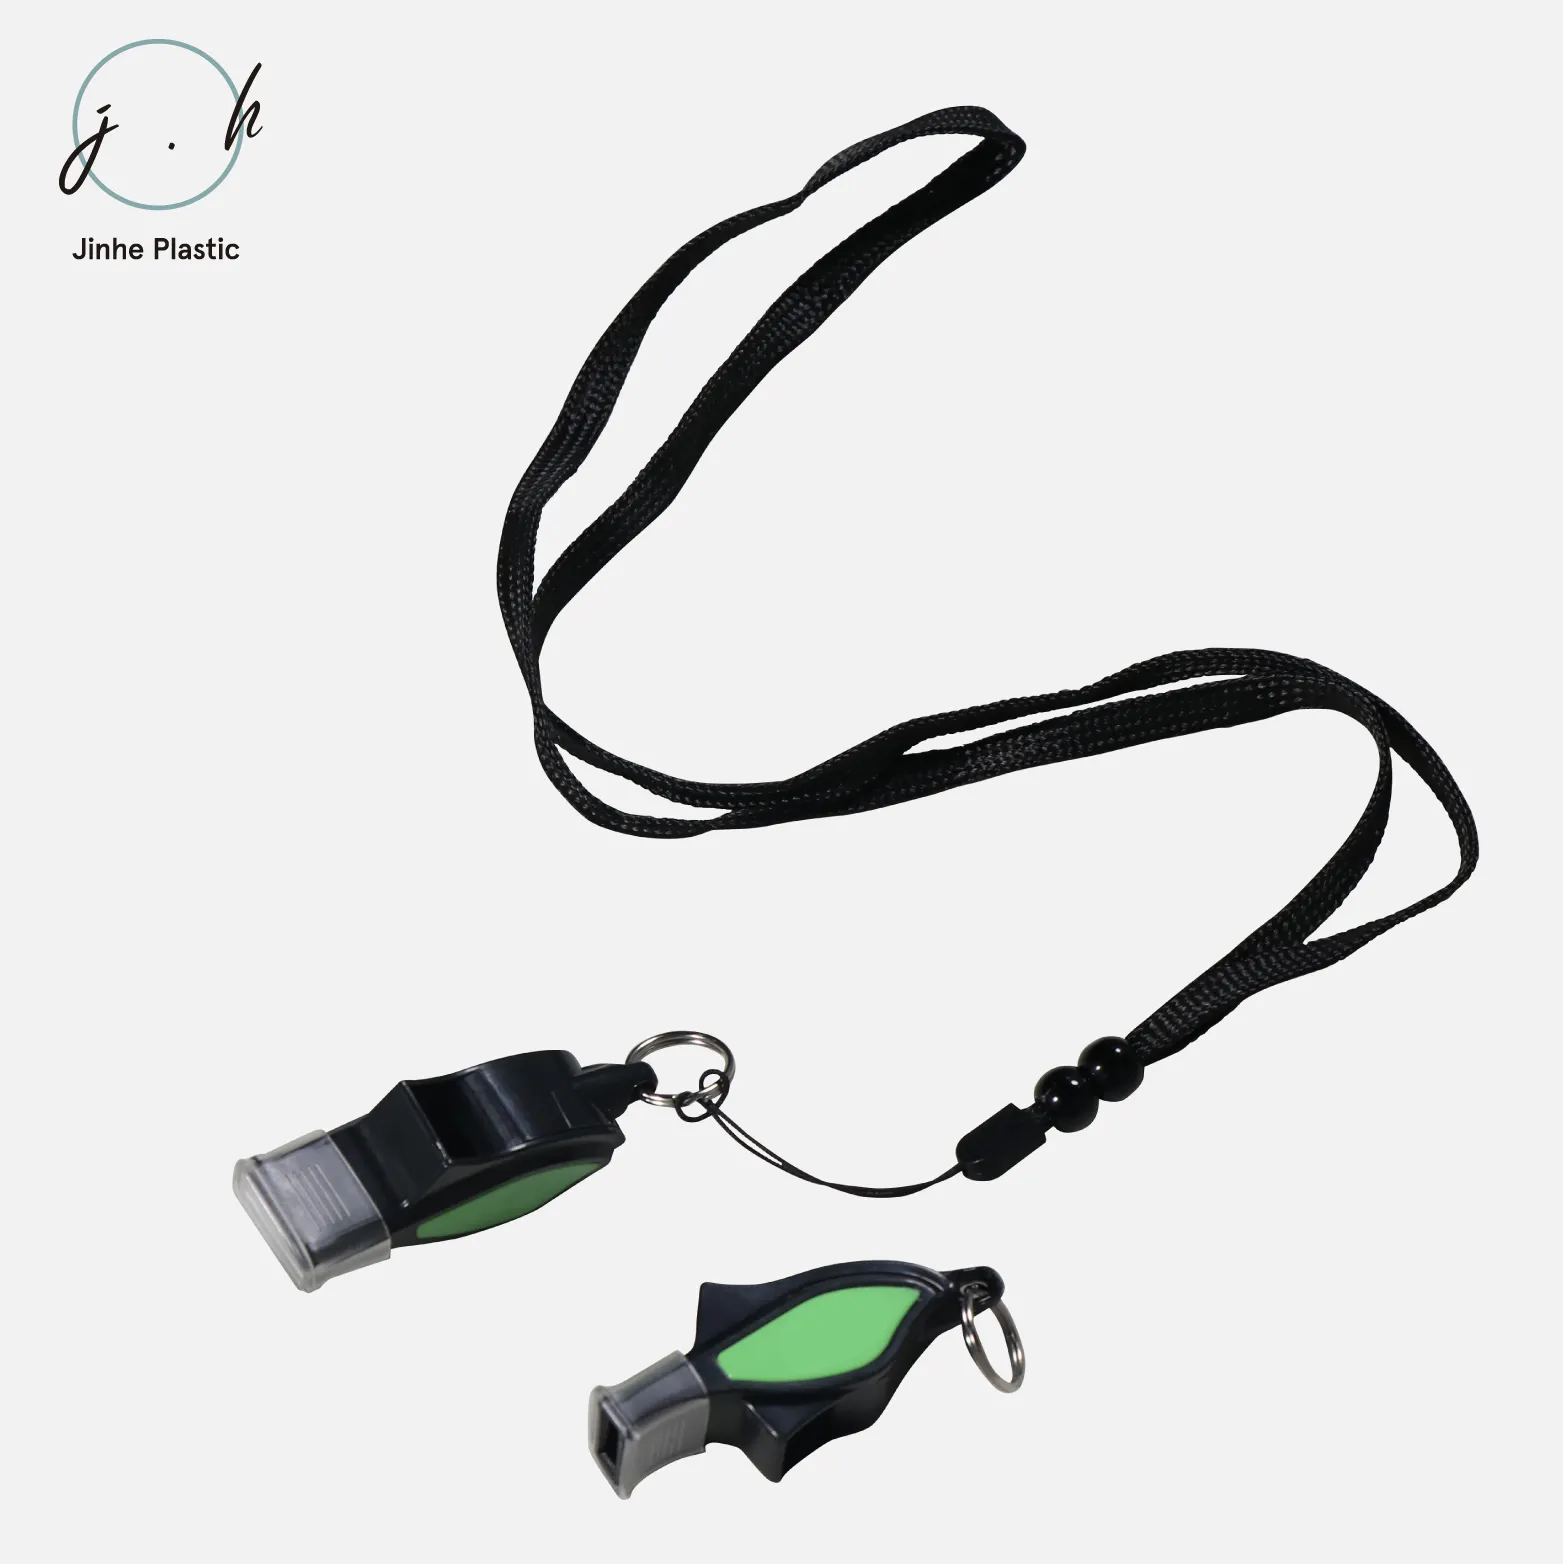 Firelong Survival Referee Whistle with Lanyard for Basketball Football Soccer Rugby Sports Referee Whistles